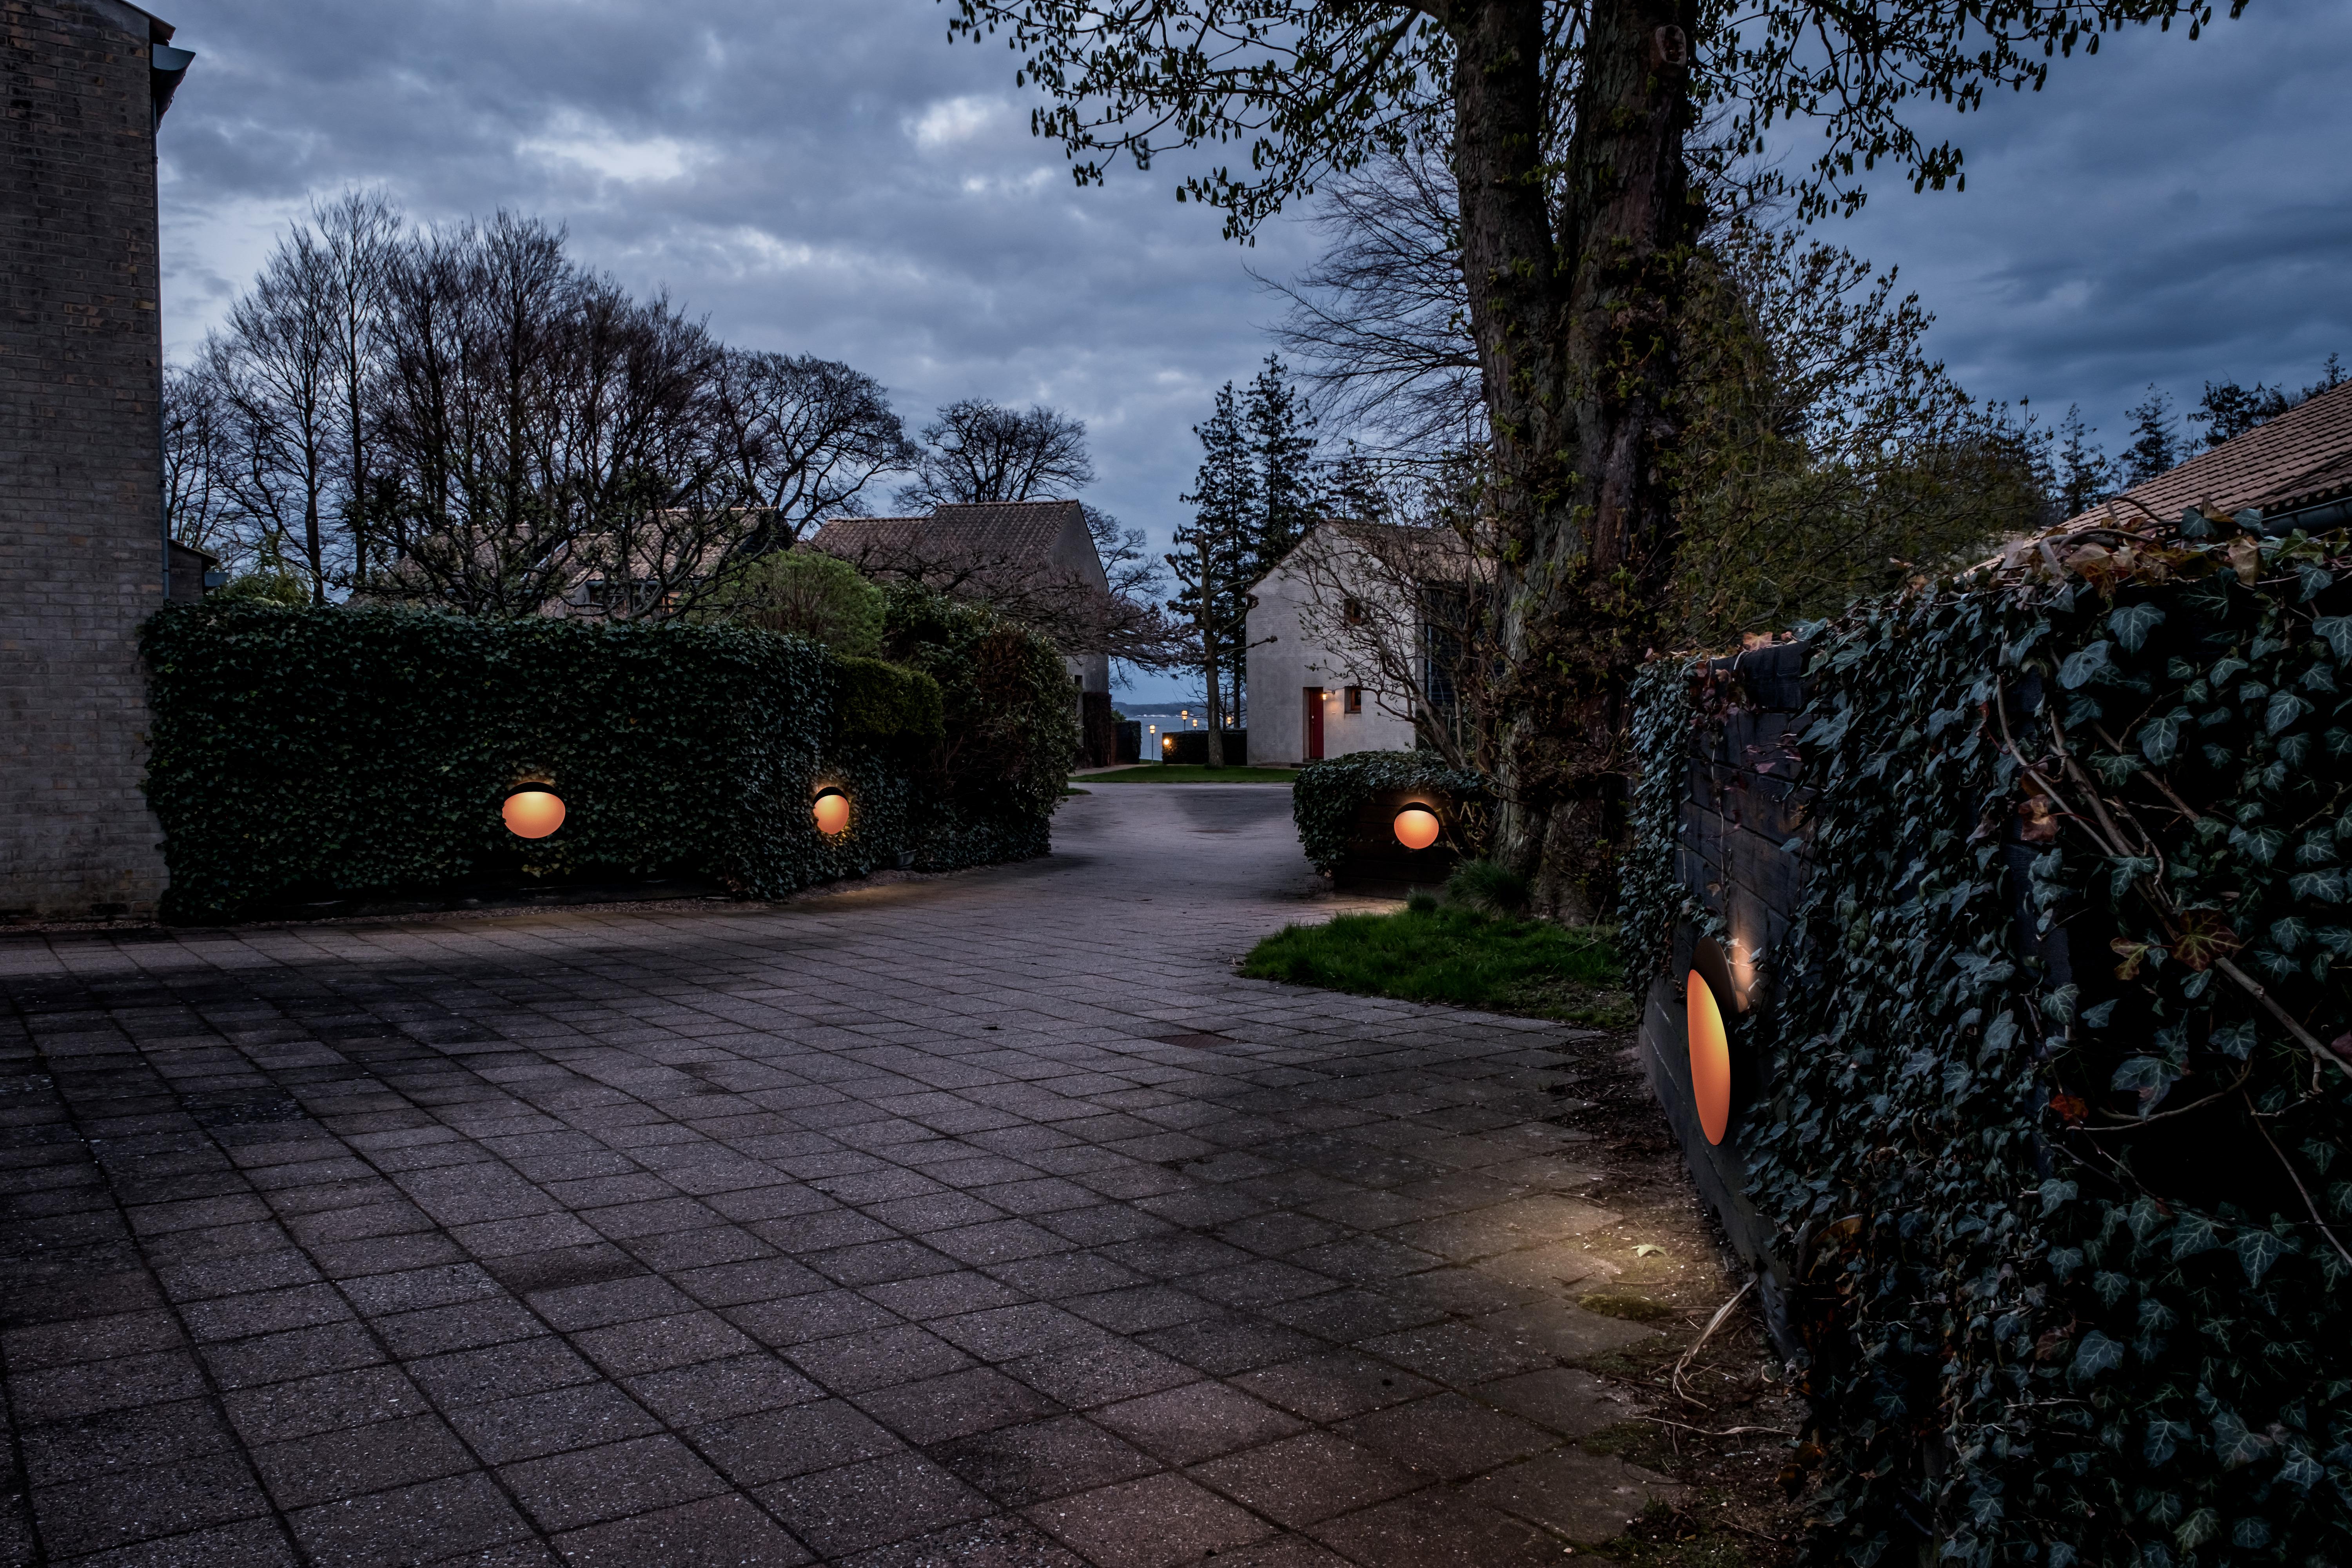 Small 'Flindt' Indoor or Outdoor Wall Light in Black for Louis Poulsen.

A circular, wall-mounted fixture that brings bold, sculptural illumination to both indoor and outdoor spaces. The slim, elliptical lamp has a floating appearance that, paired